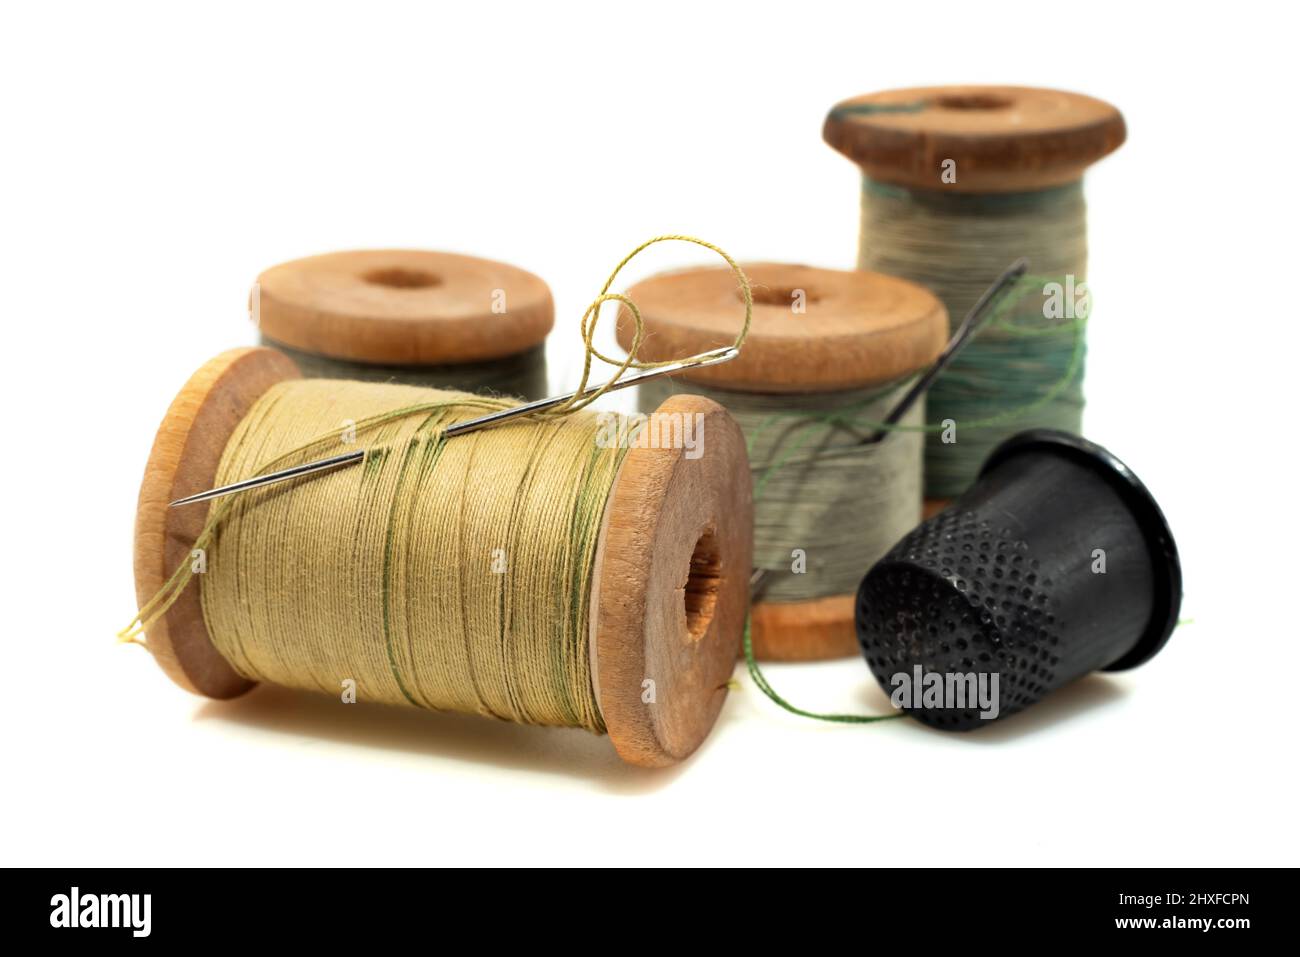 Premium Photo  A bobbin of thread with a needle and a thimble